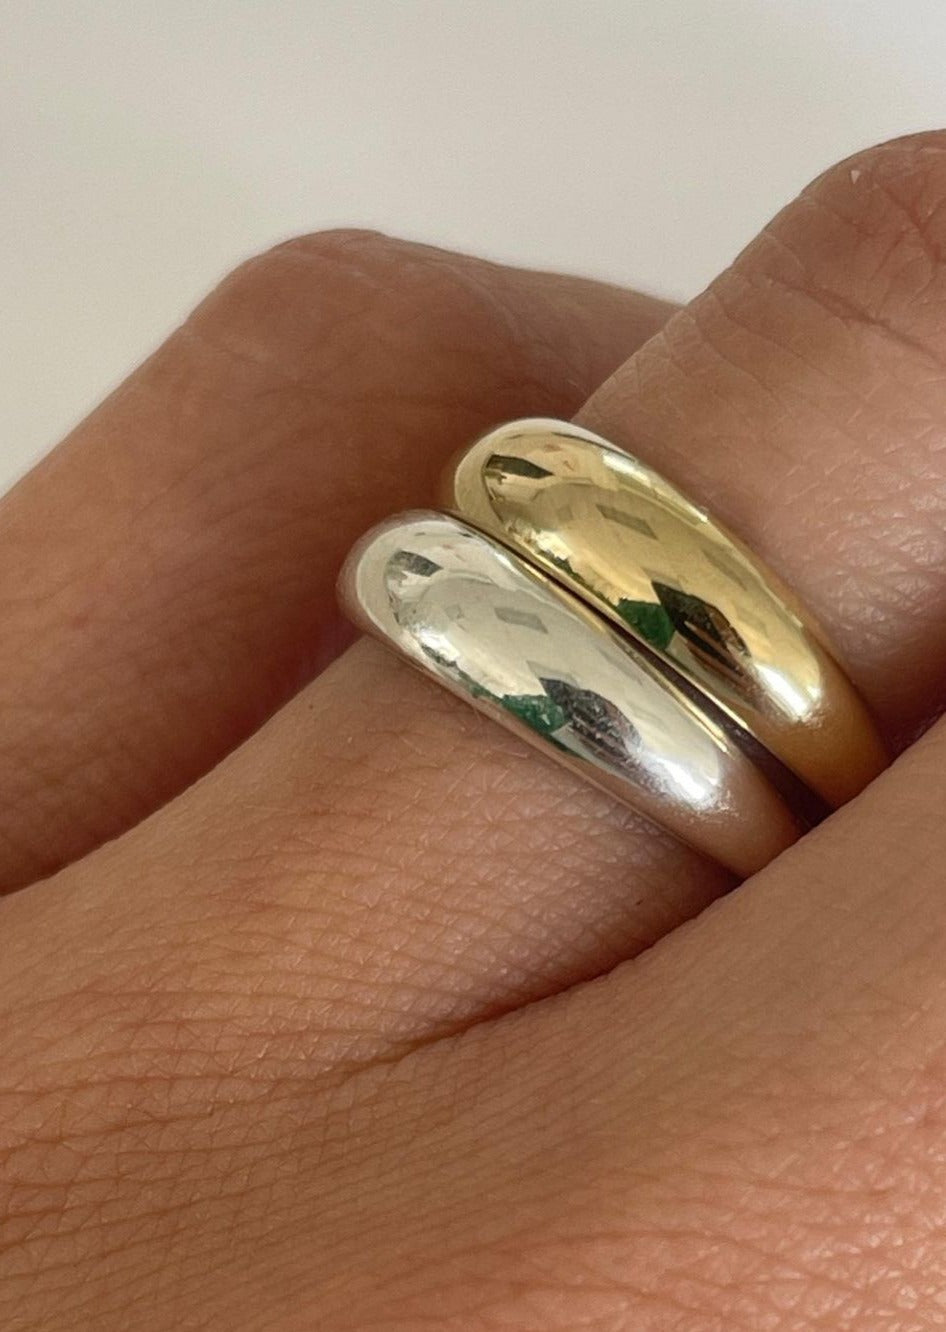 The Duo Gold Diamond and Gold Plain Band Silver Rings – Meery Rings